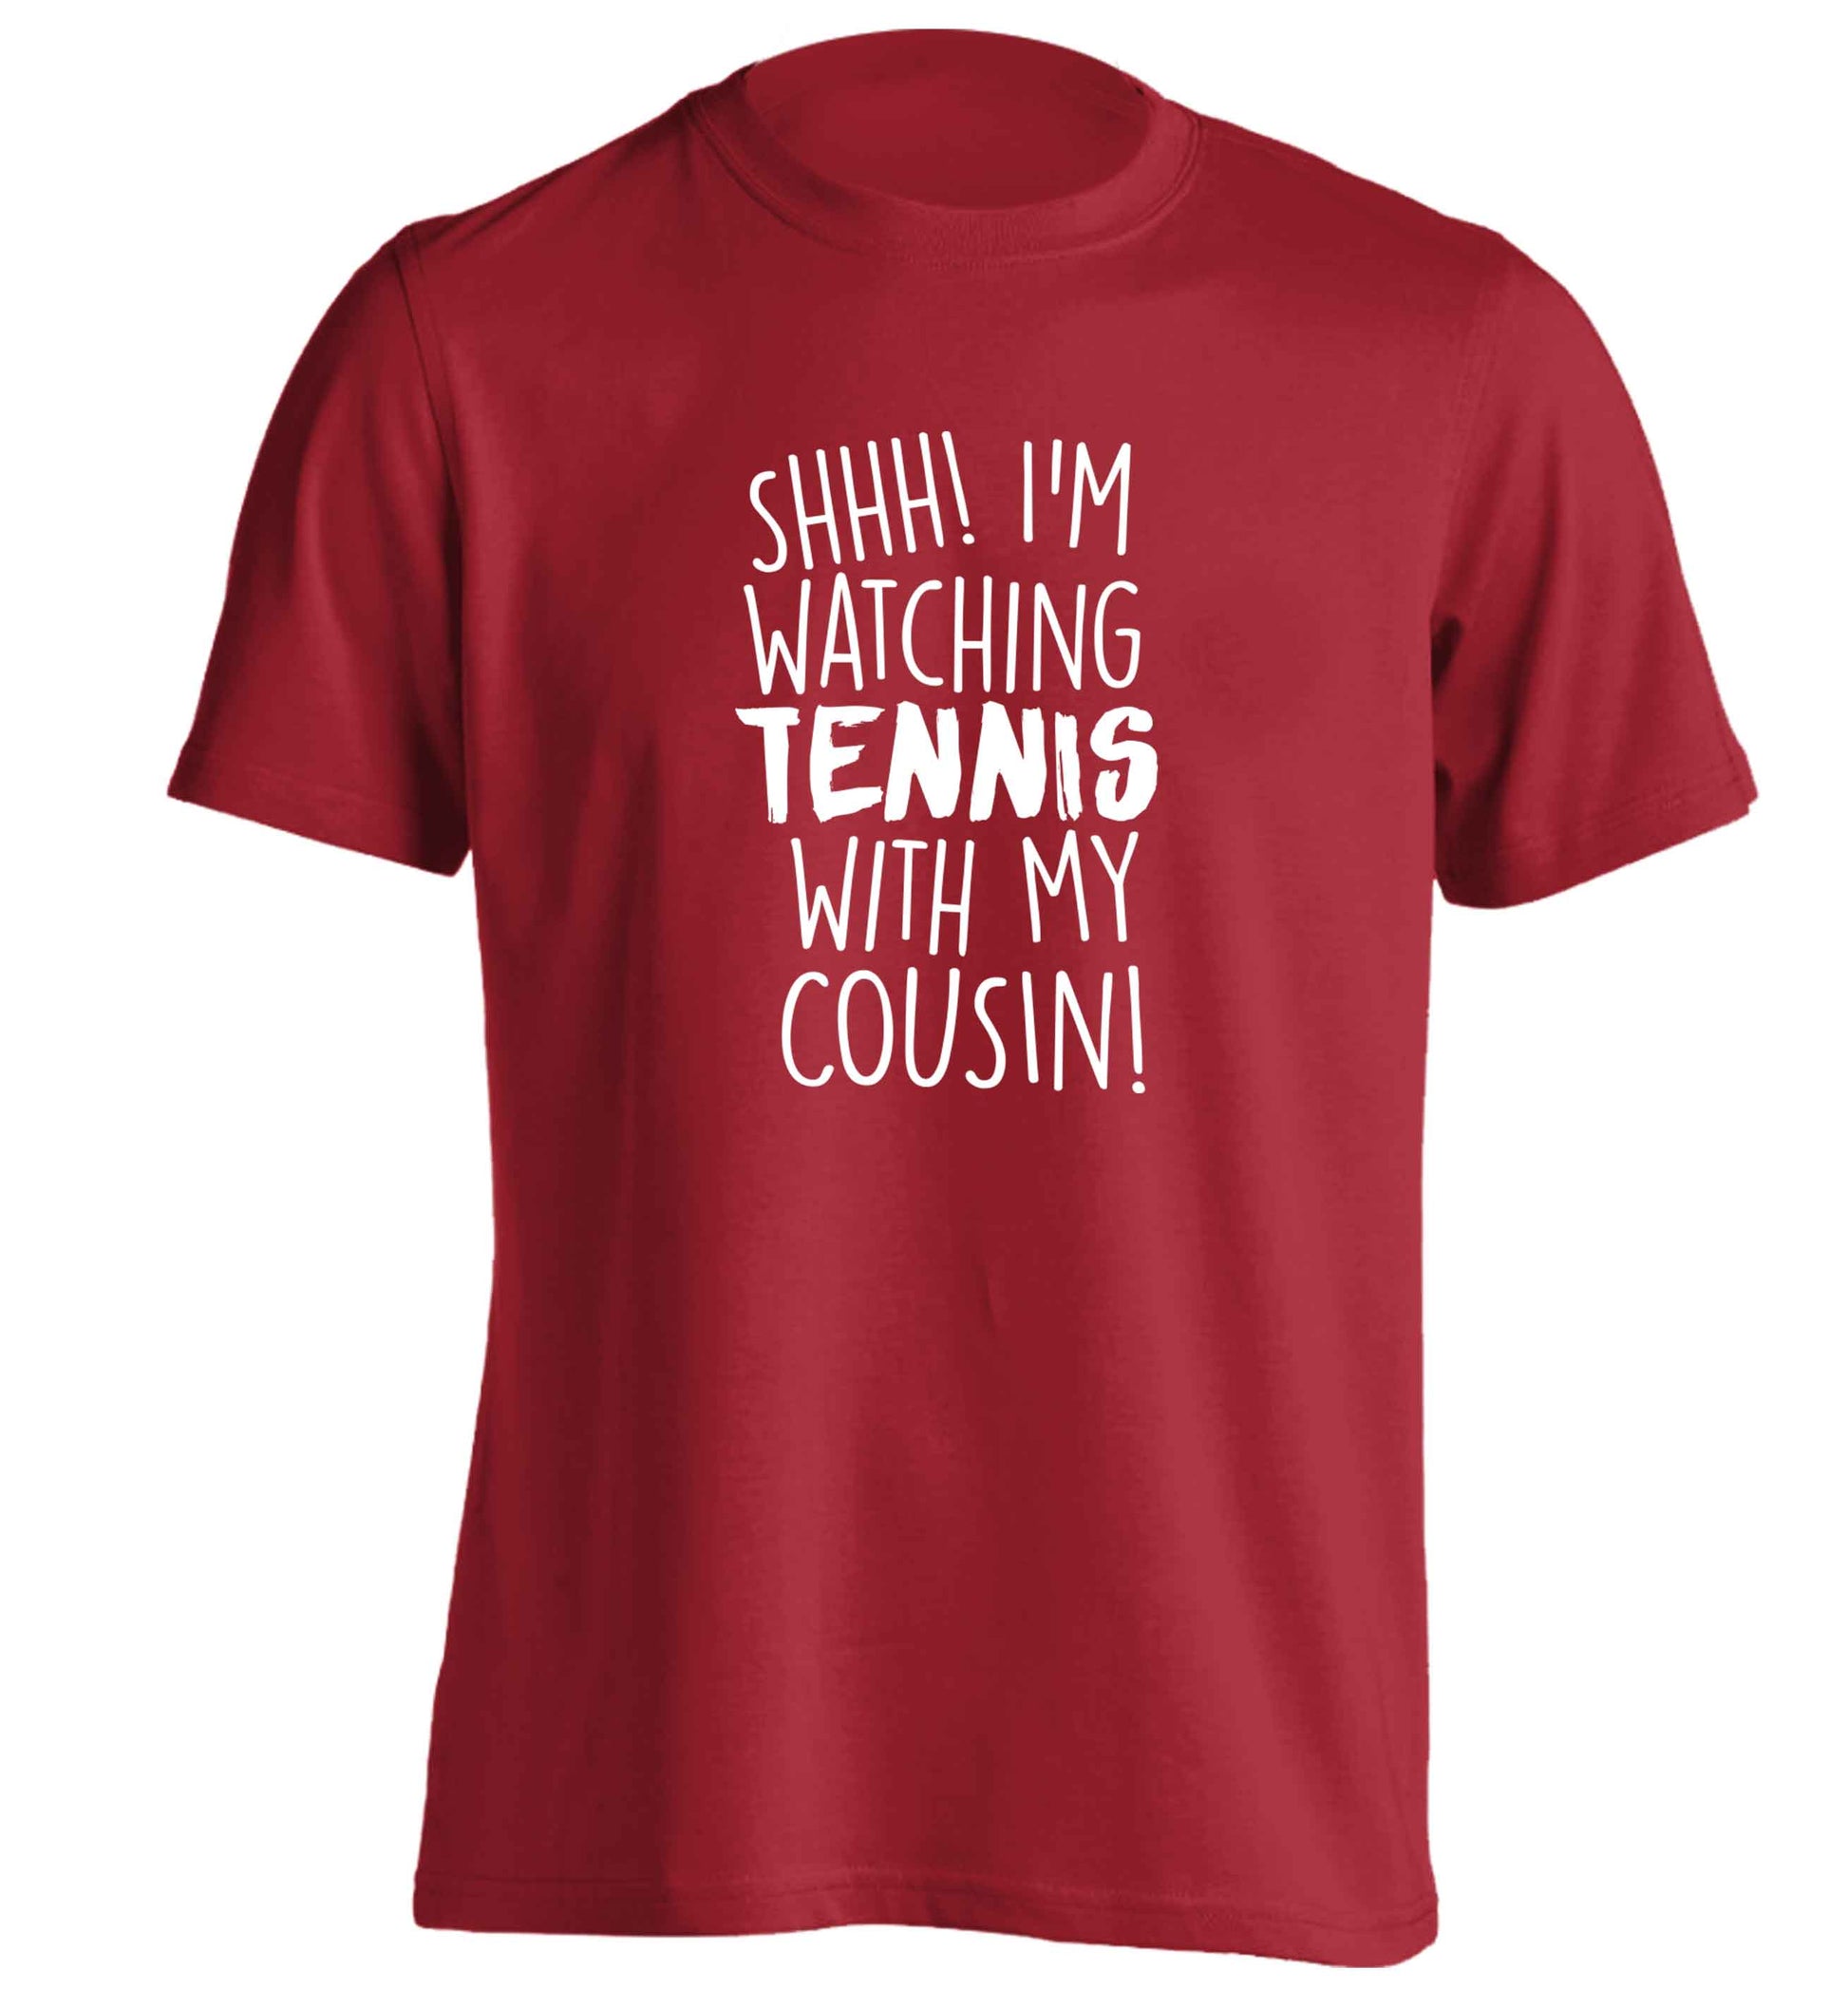 Shh! I'm watching tennis with my cousin! adults unisex red Tshirt 2XL